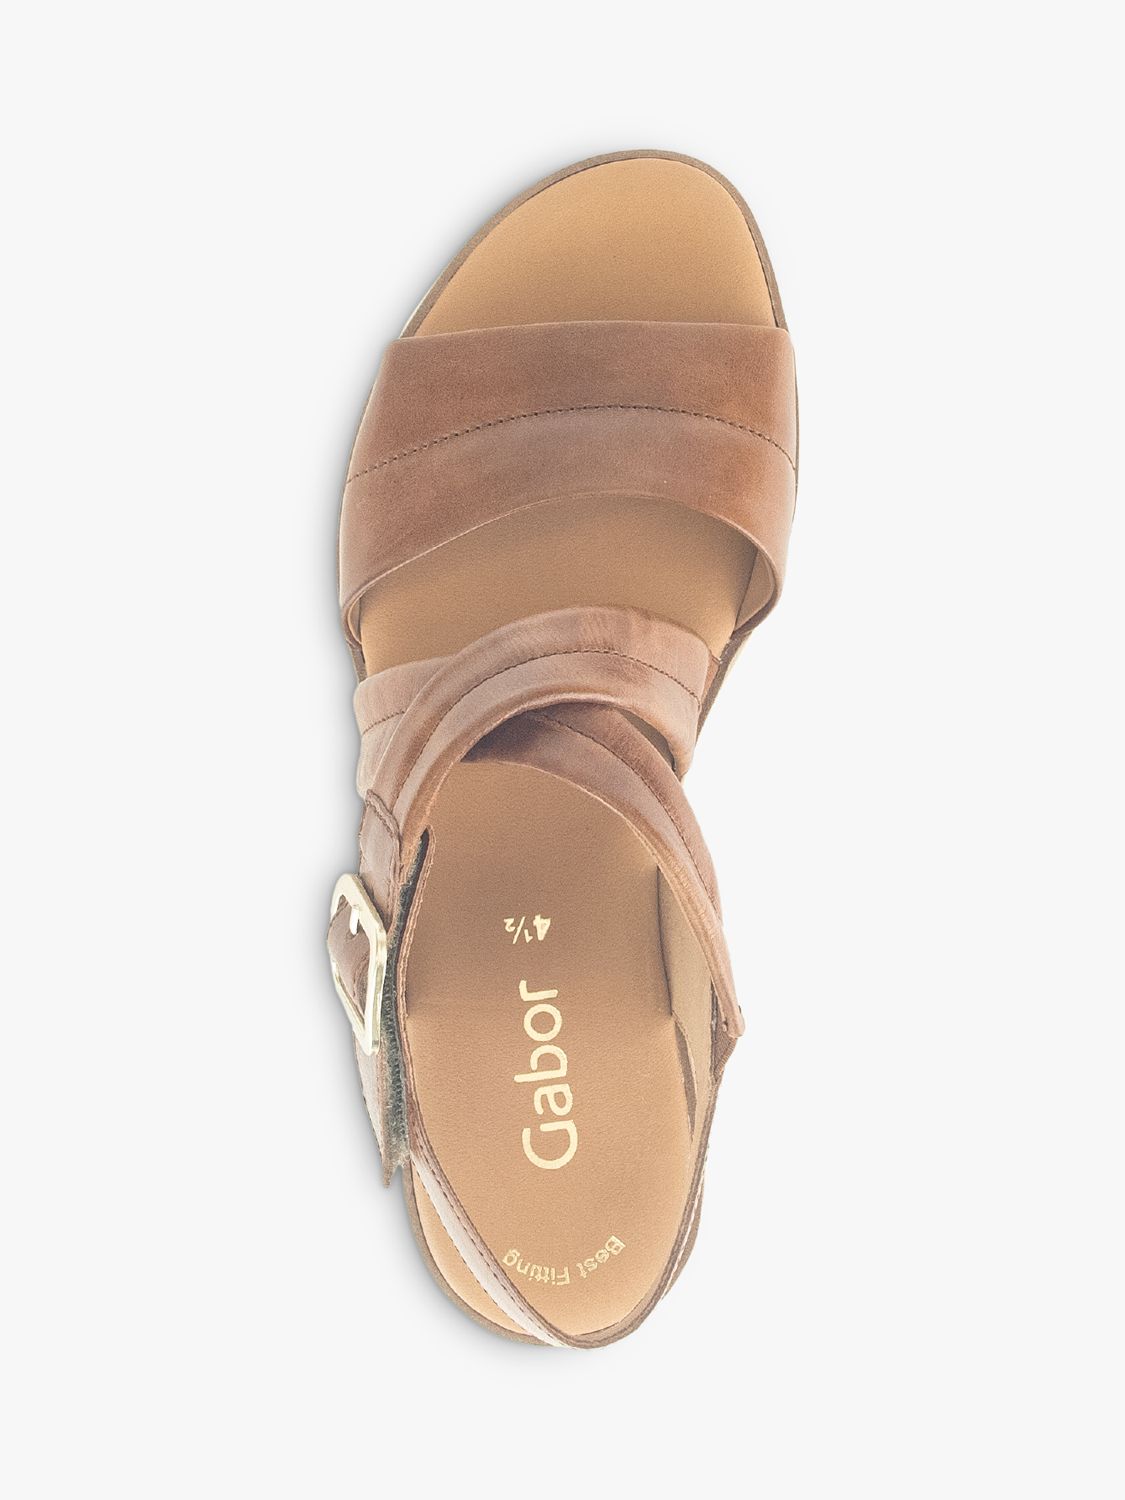 Buy Gabor Location Leather Open Toe Sandals, Camel Online at johnlewis.com